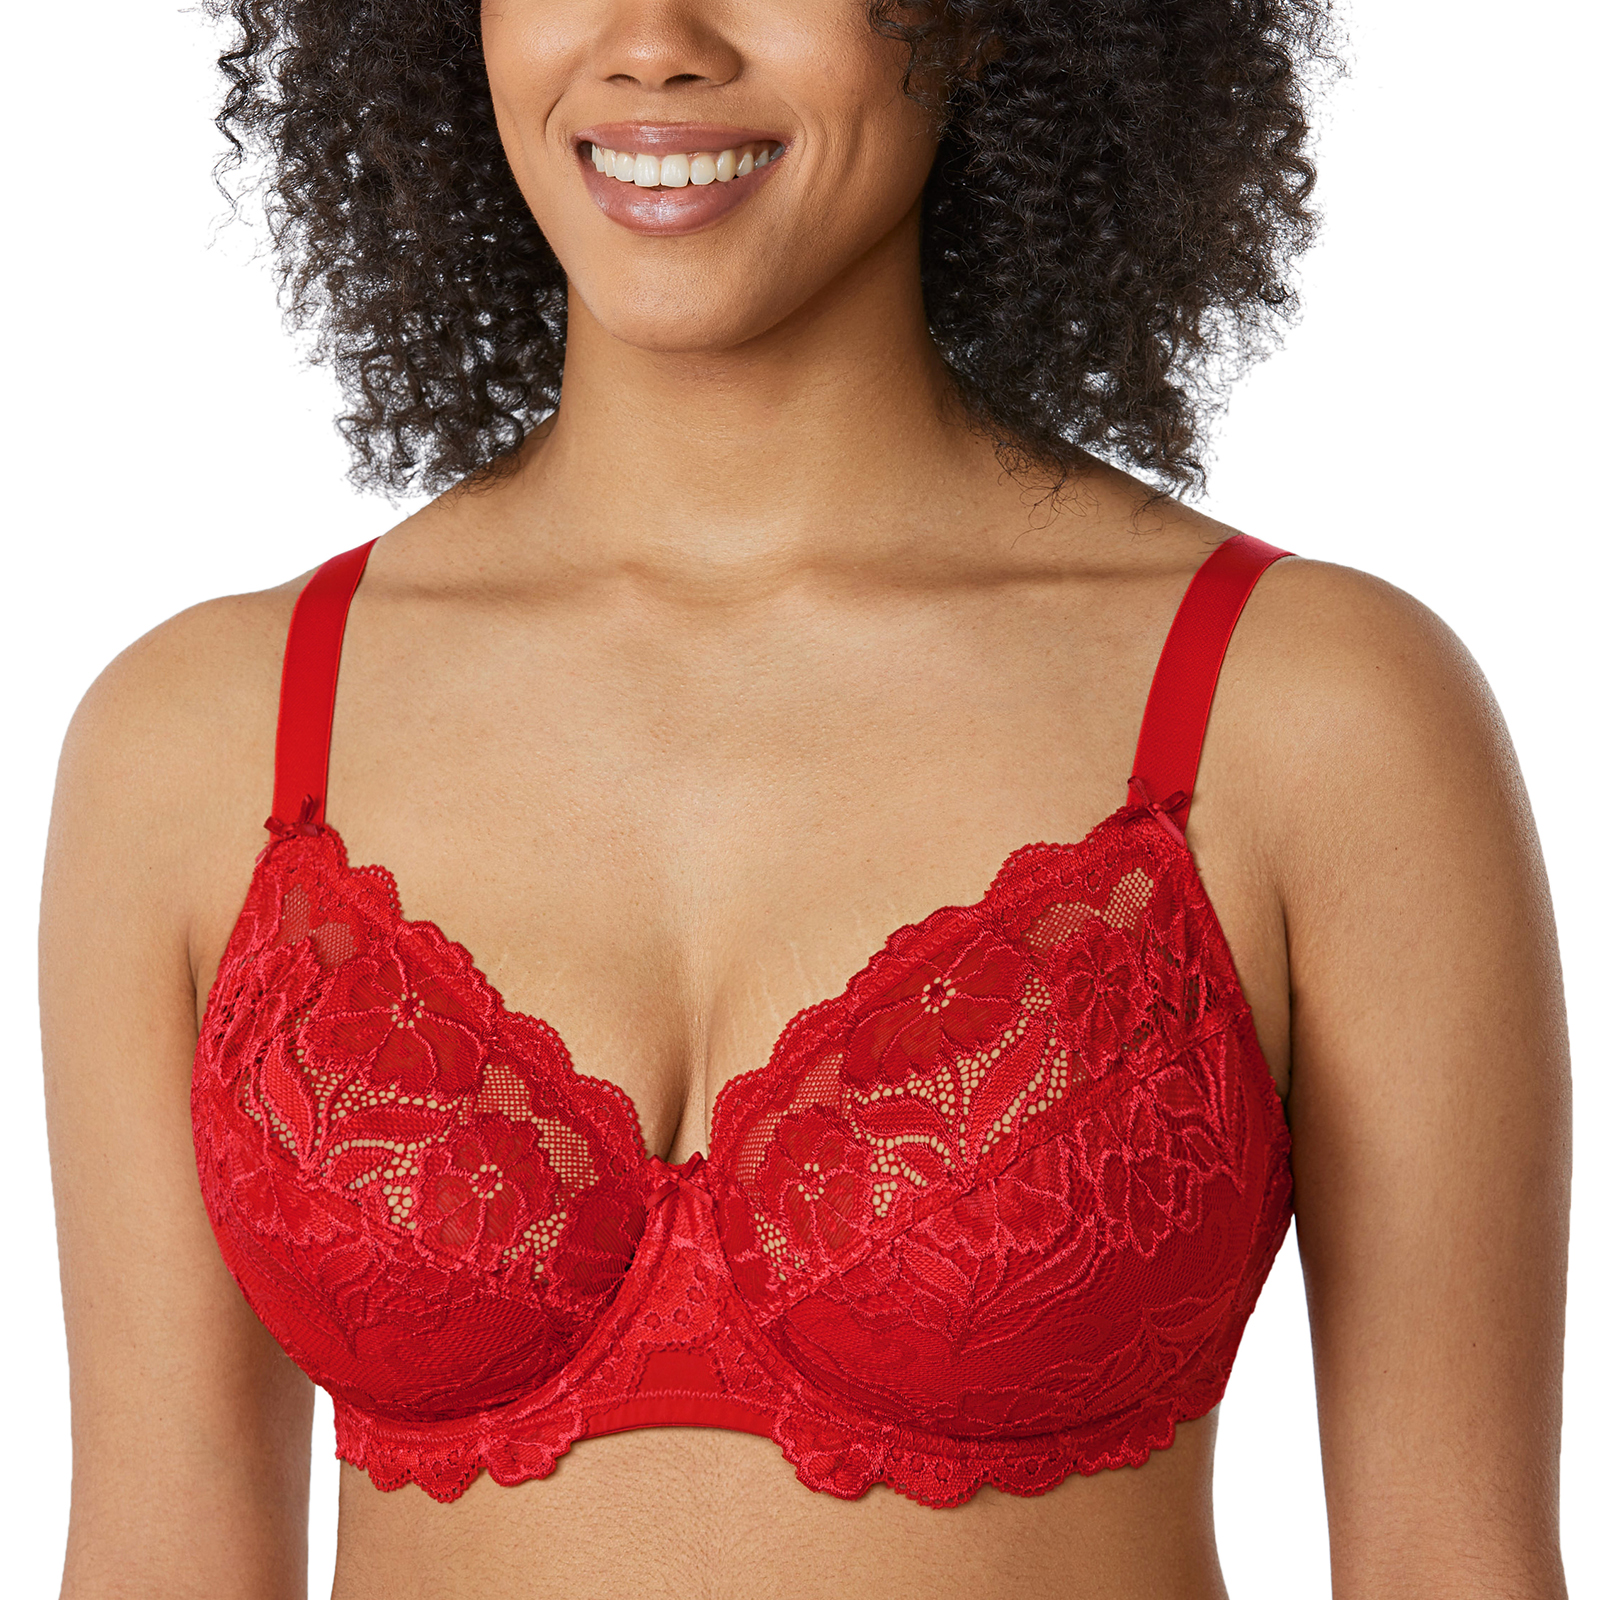  DELIMIRA Womens Plus Size Bras Minimizer Underwire Full  Coverage Unlined Seamless Cup K